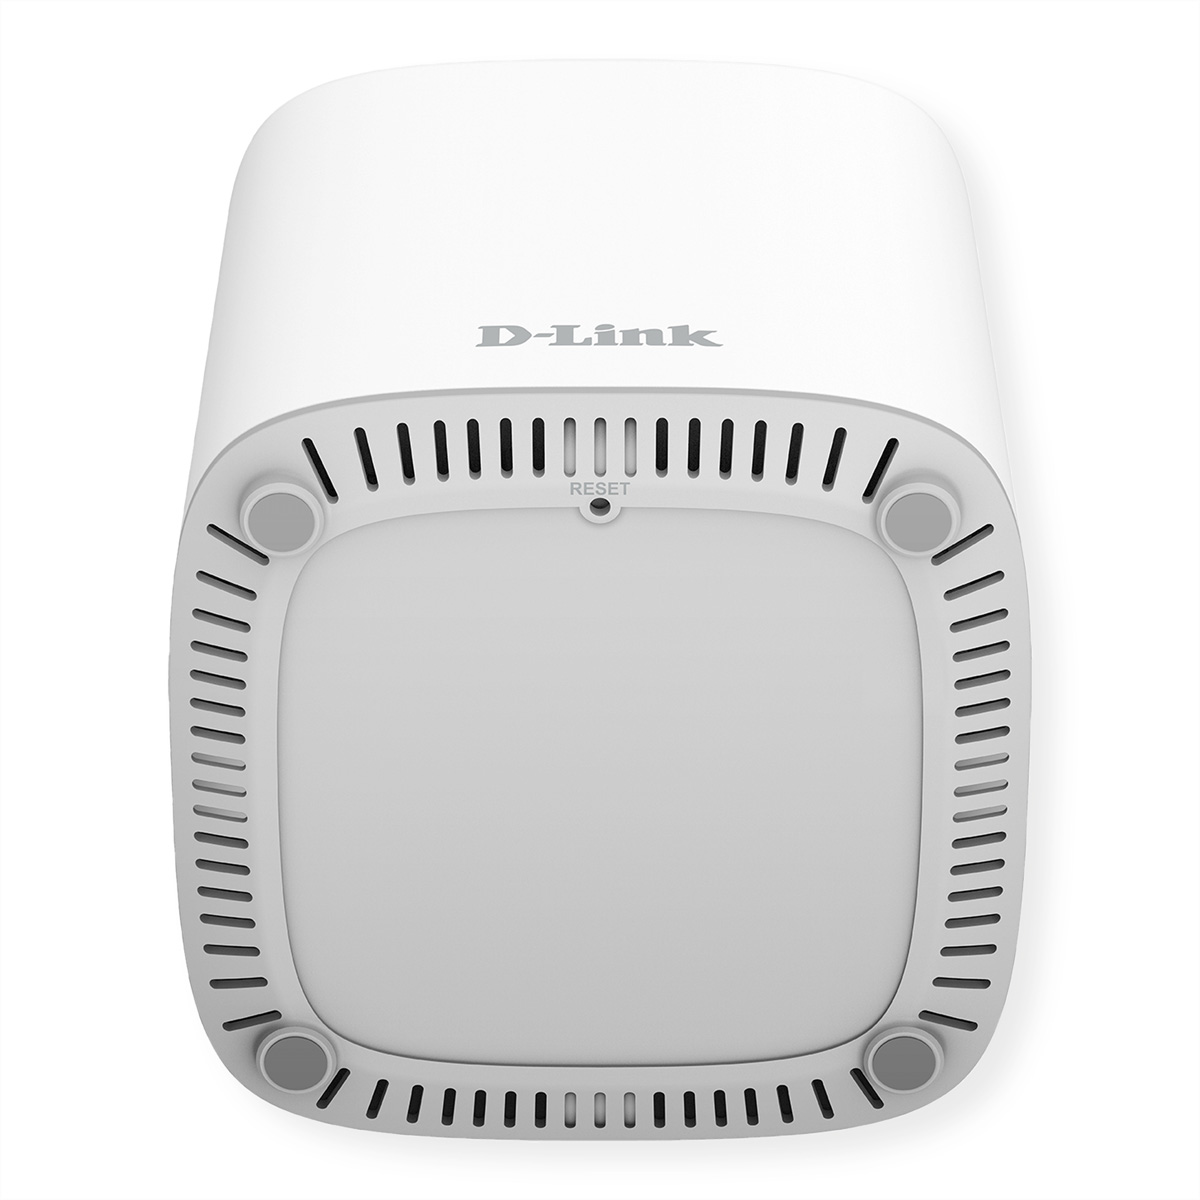 Home Band Set Wi‑Fi AX1800 System, 3er Dual Points COVR‑X1863 Gbit/s Whole WLAN Access Mesh D-LINK 6 1,8